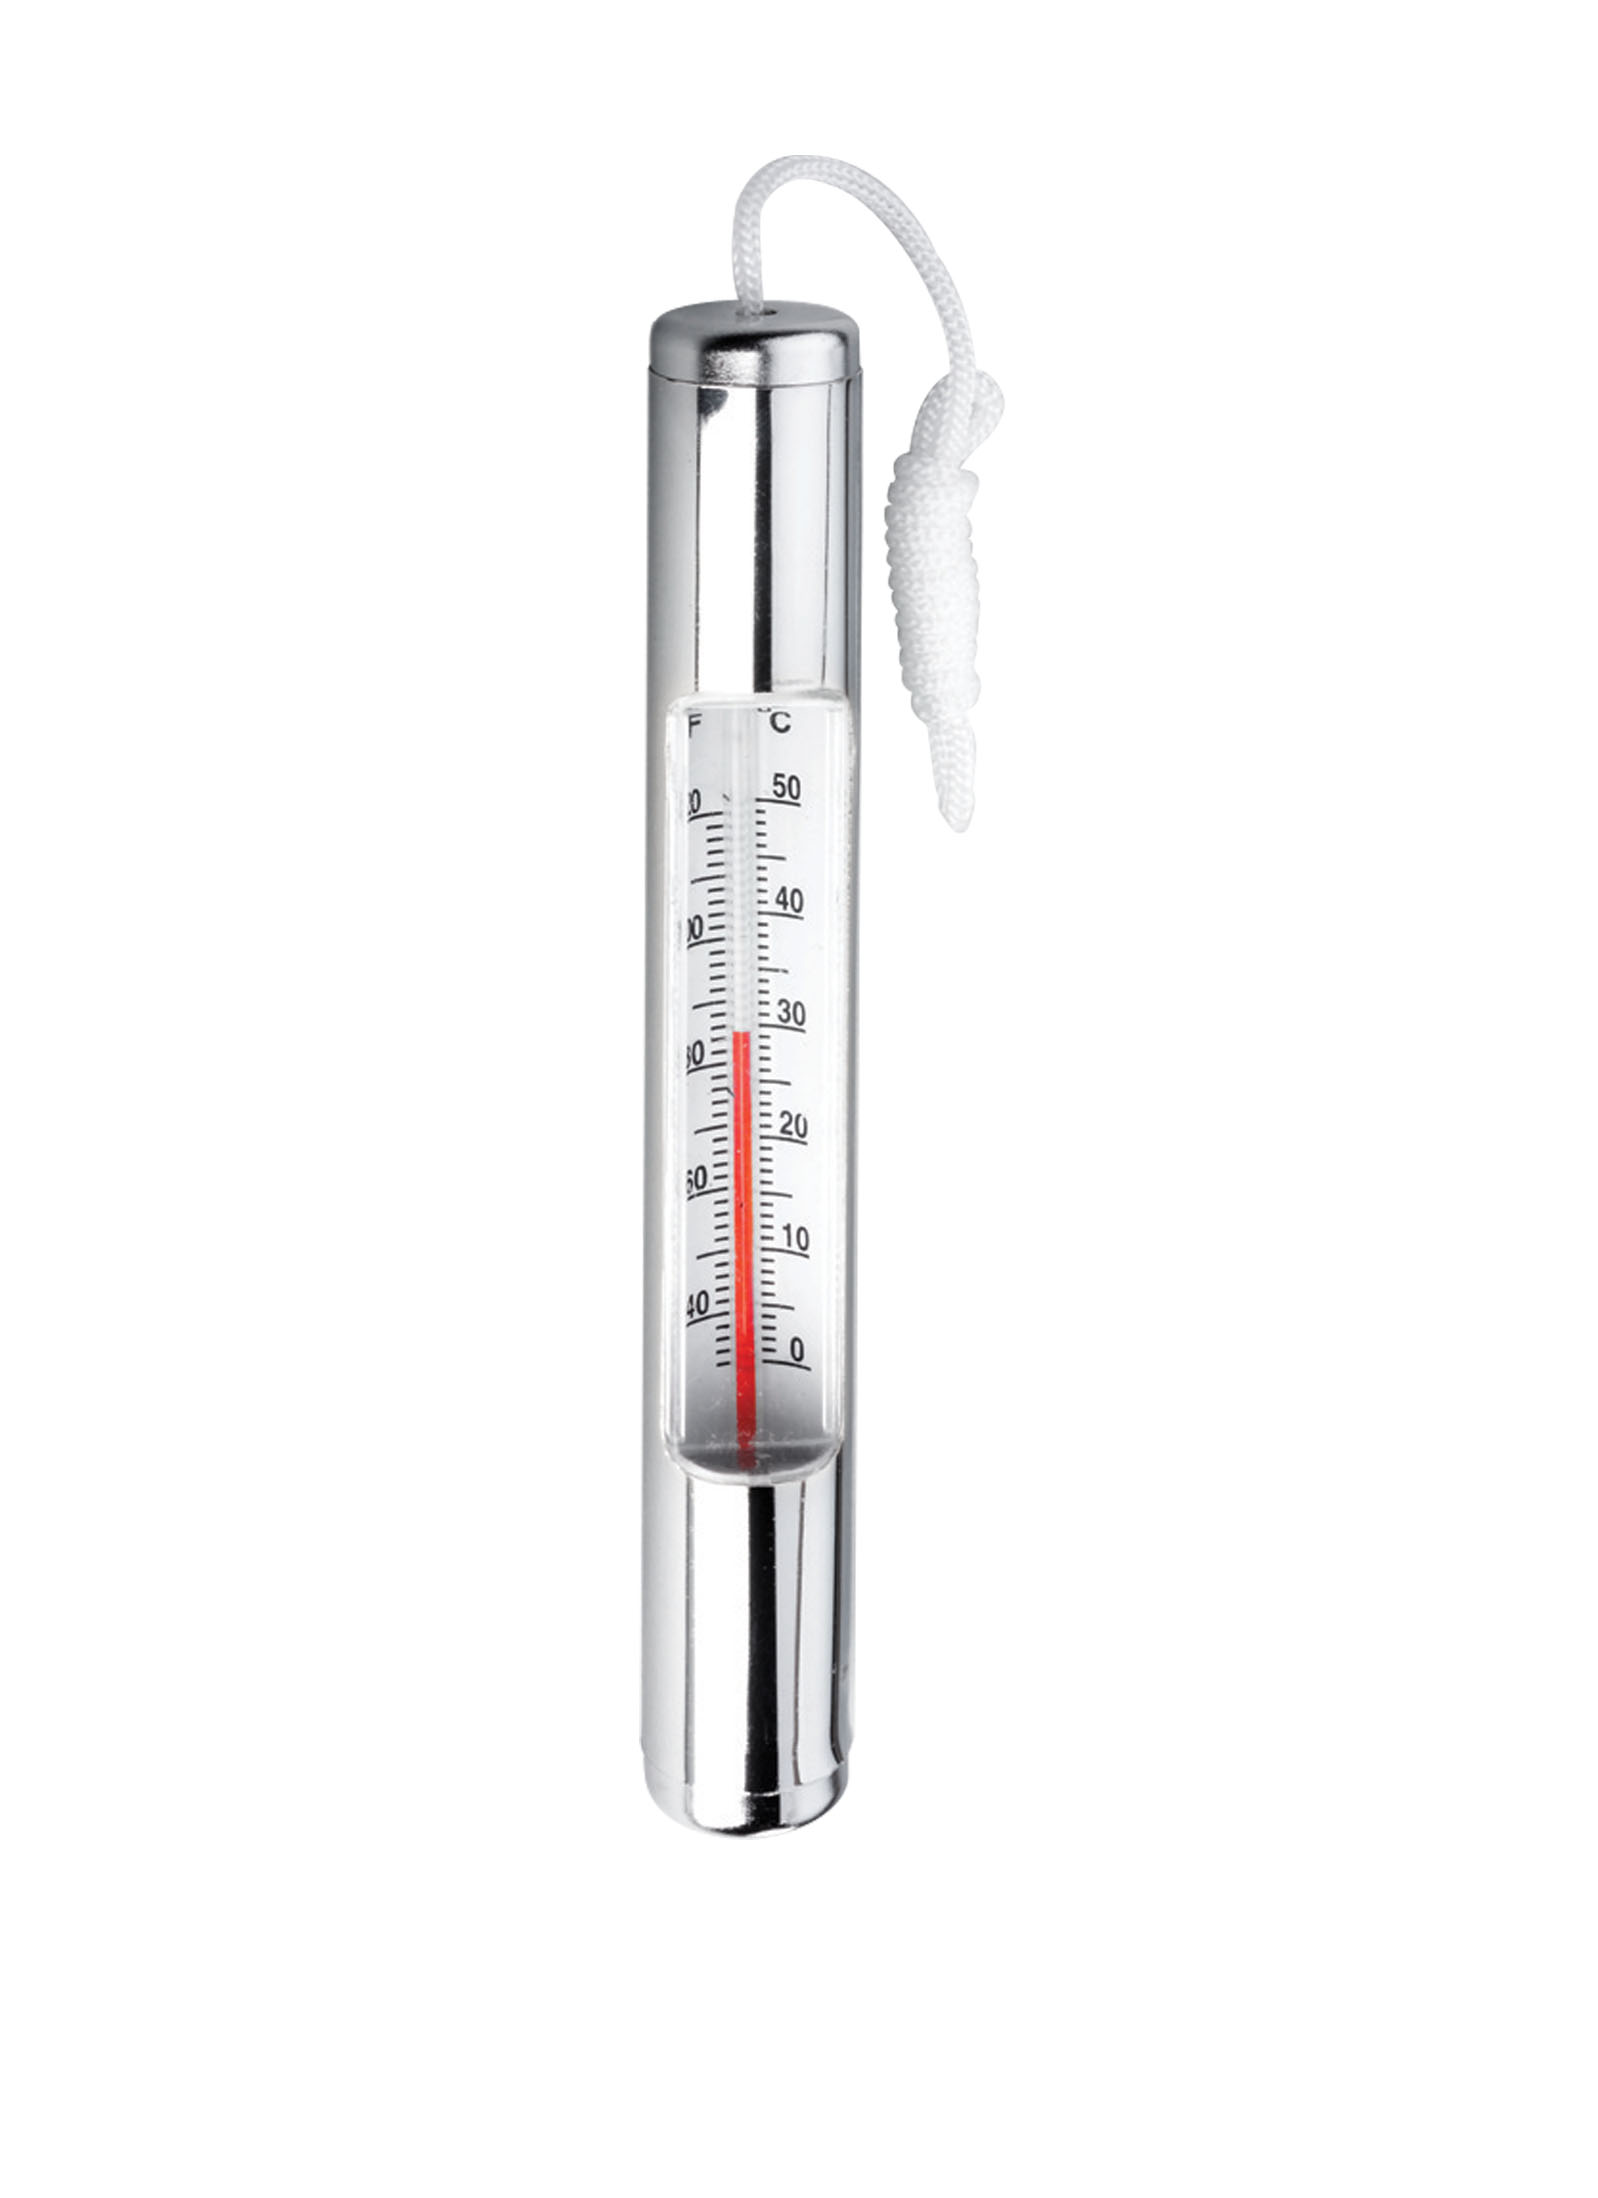 Thermometer Chrome Plated 150025PT